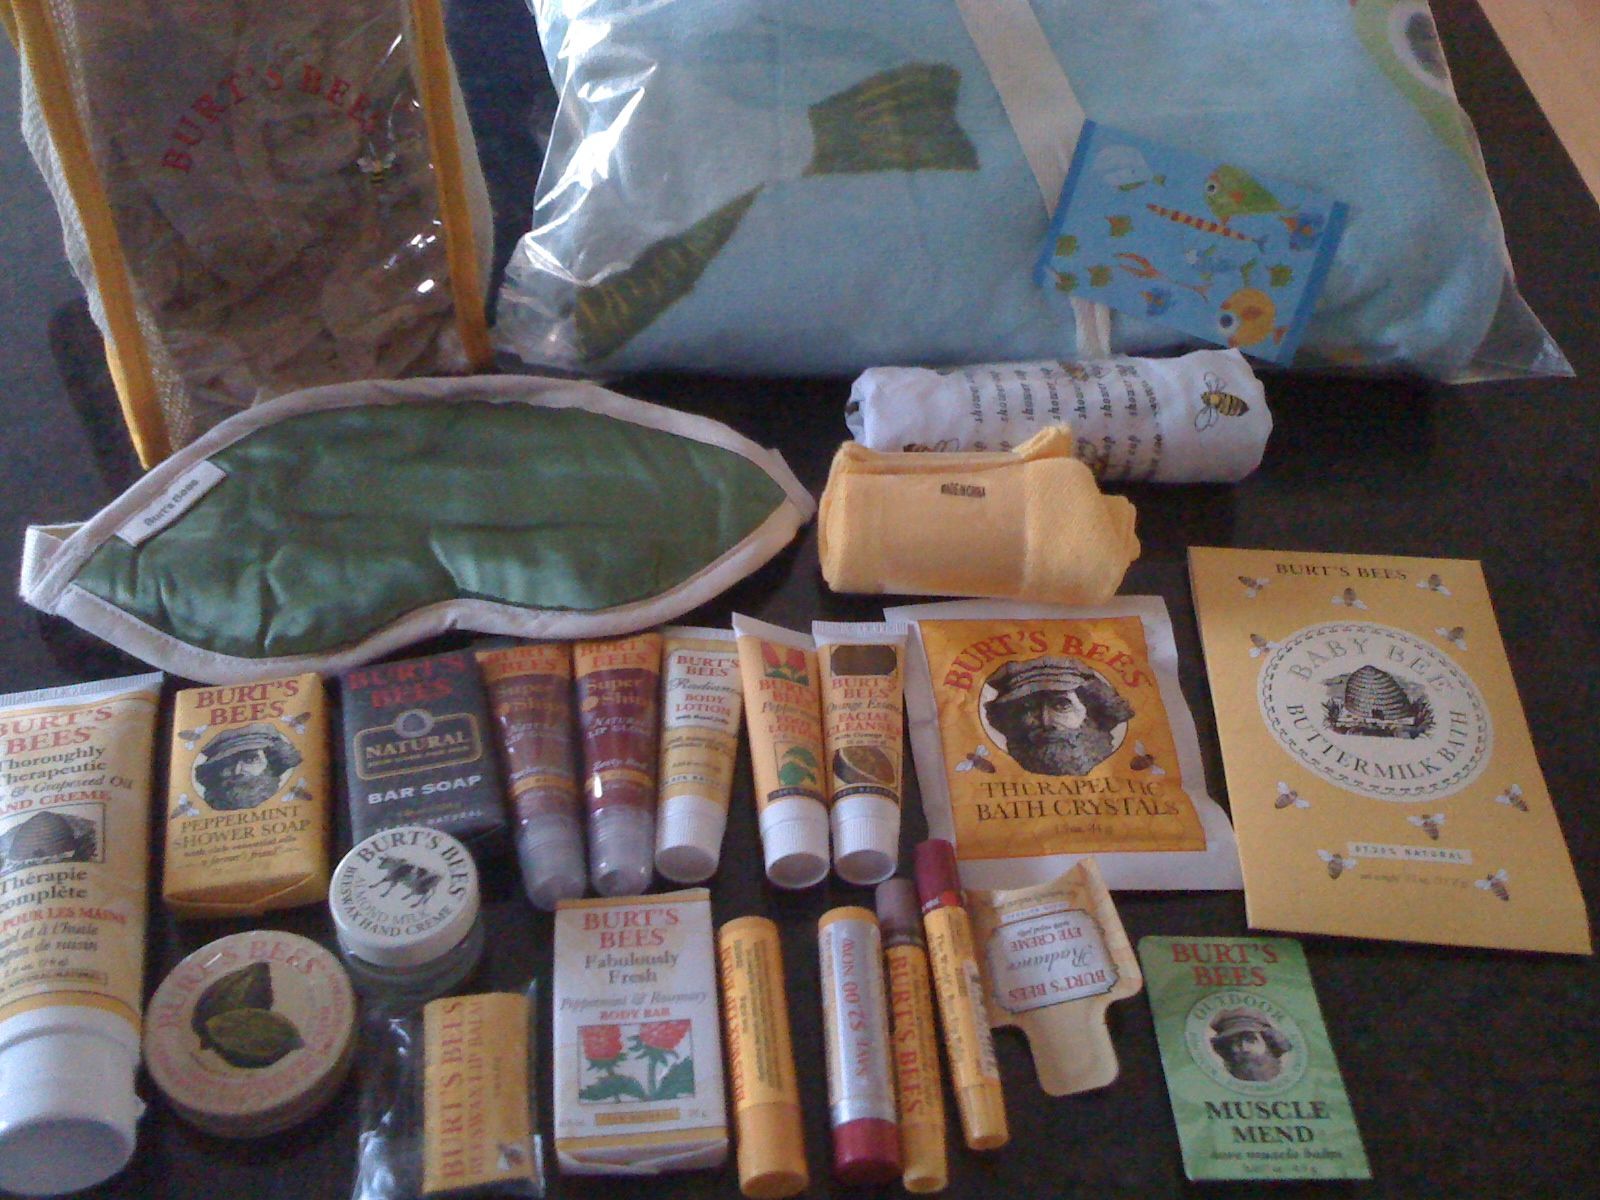 In My Mailbox: Burt’s Bees and Pottery Barn Towels